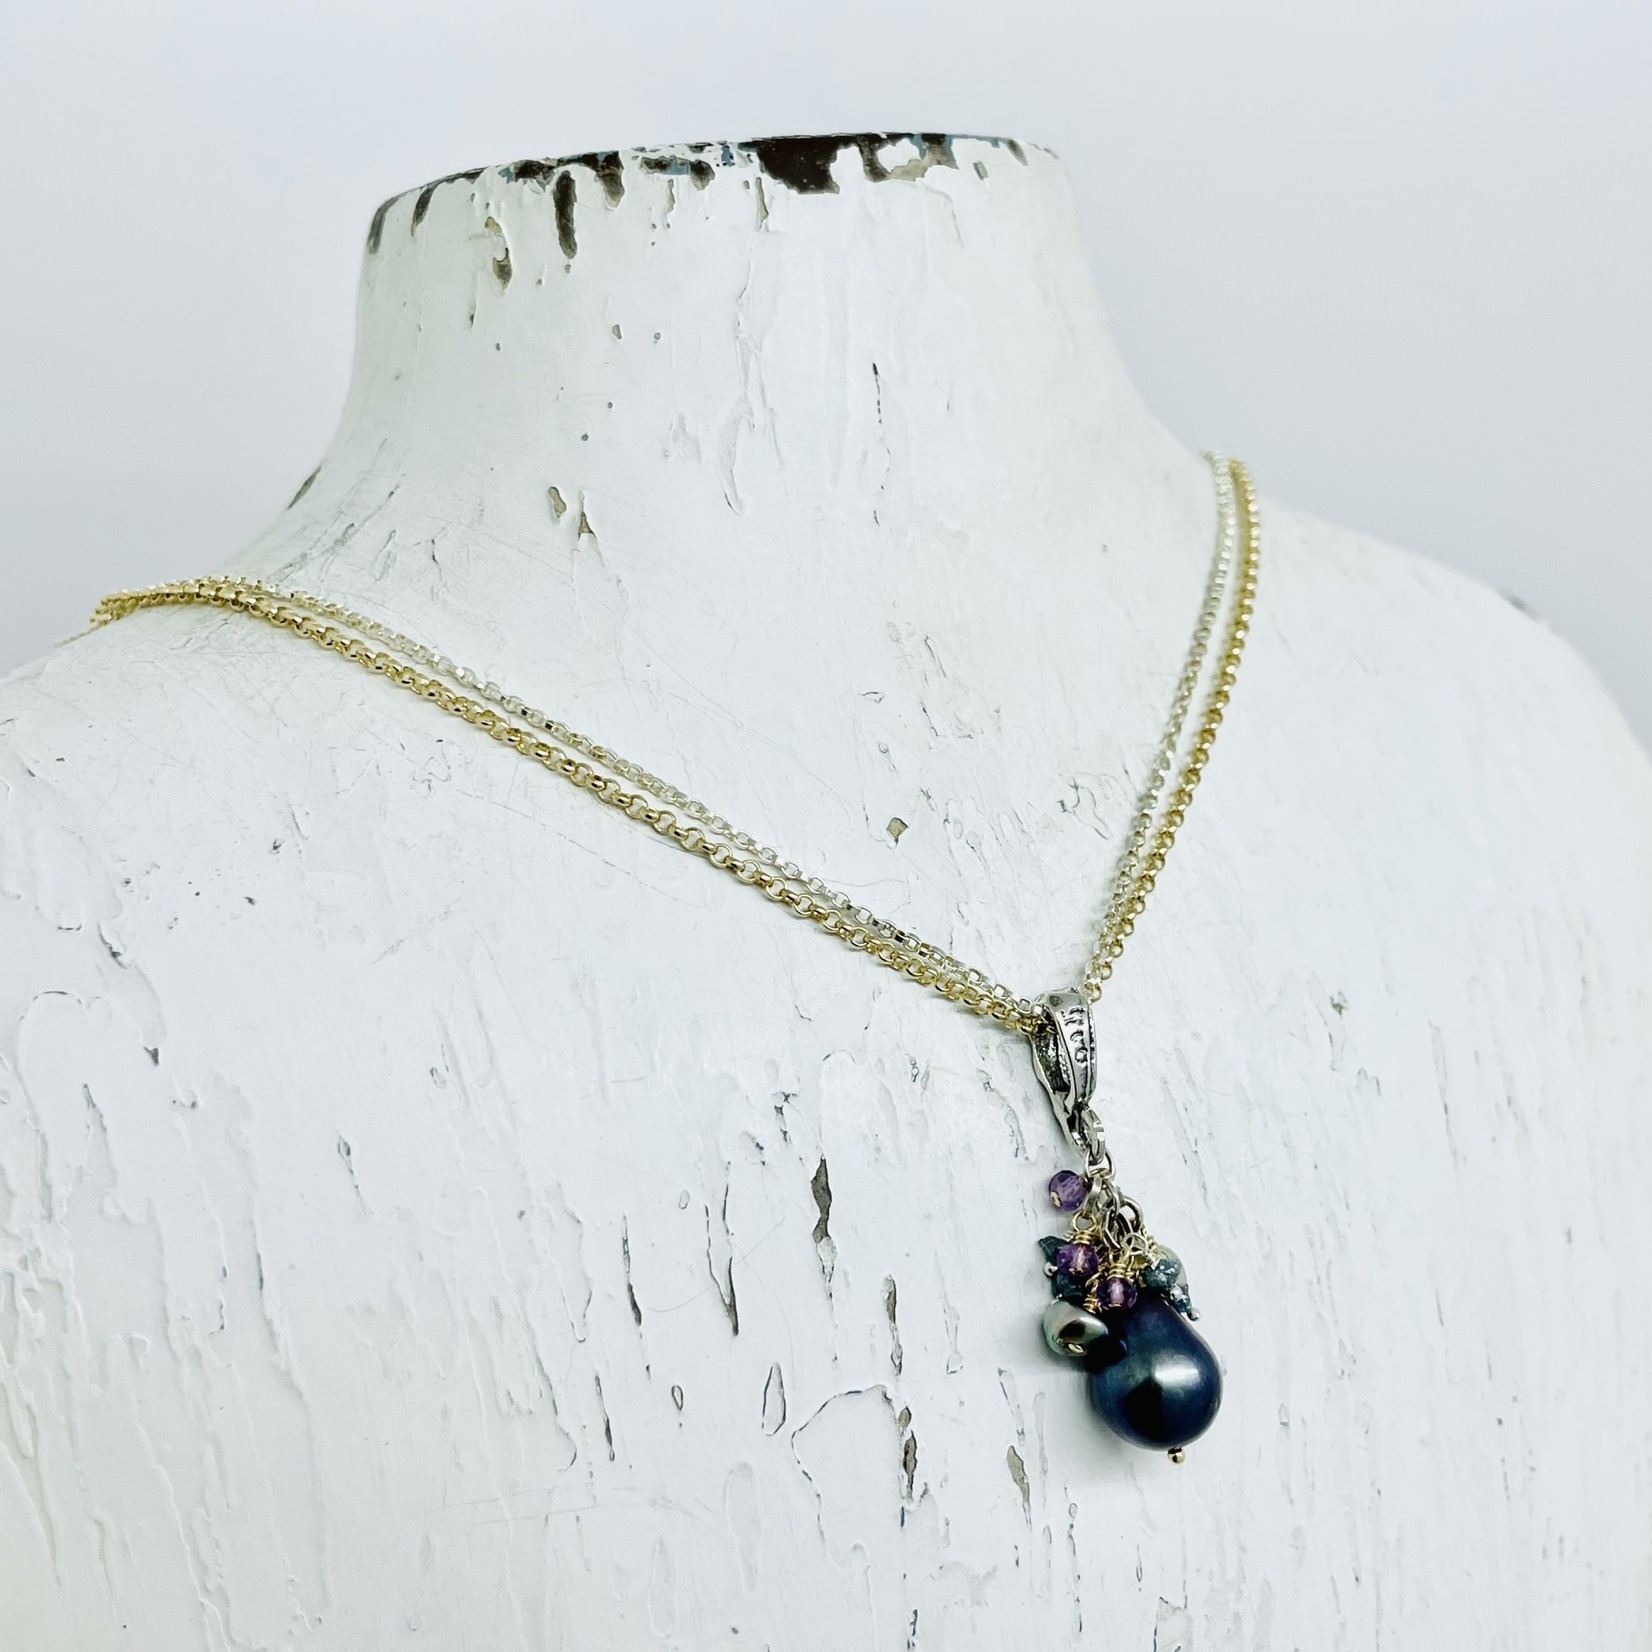 Handmade Necklace with peacock pearl, 14 k g.f. and silver chains, blue diamonds, amethyst, hammered bail, 14 k g.f. and silver chains